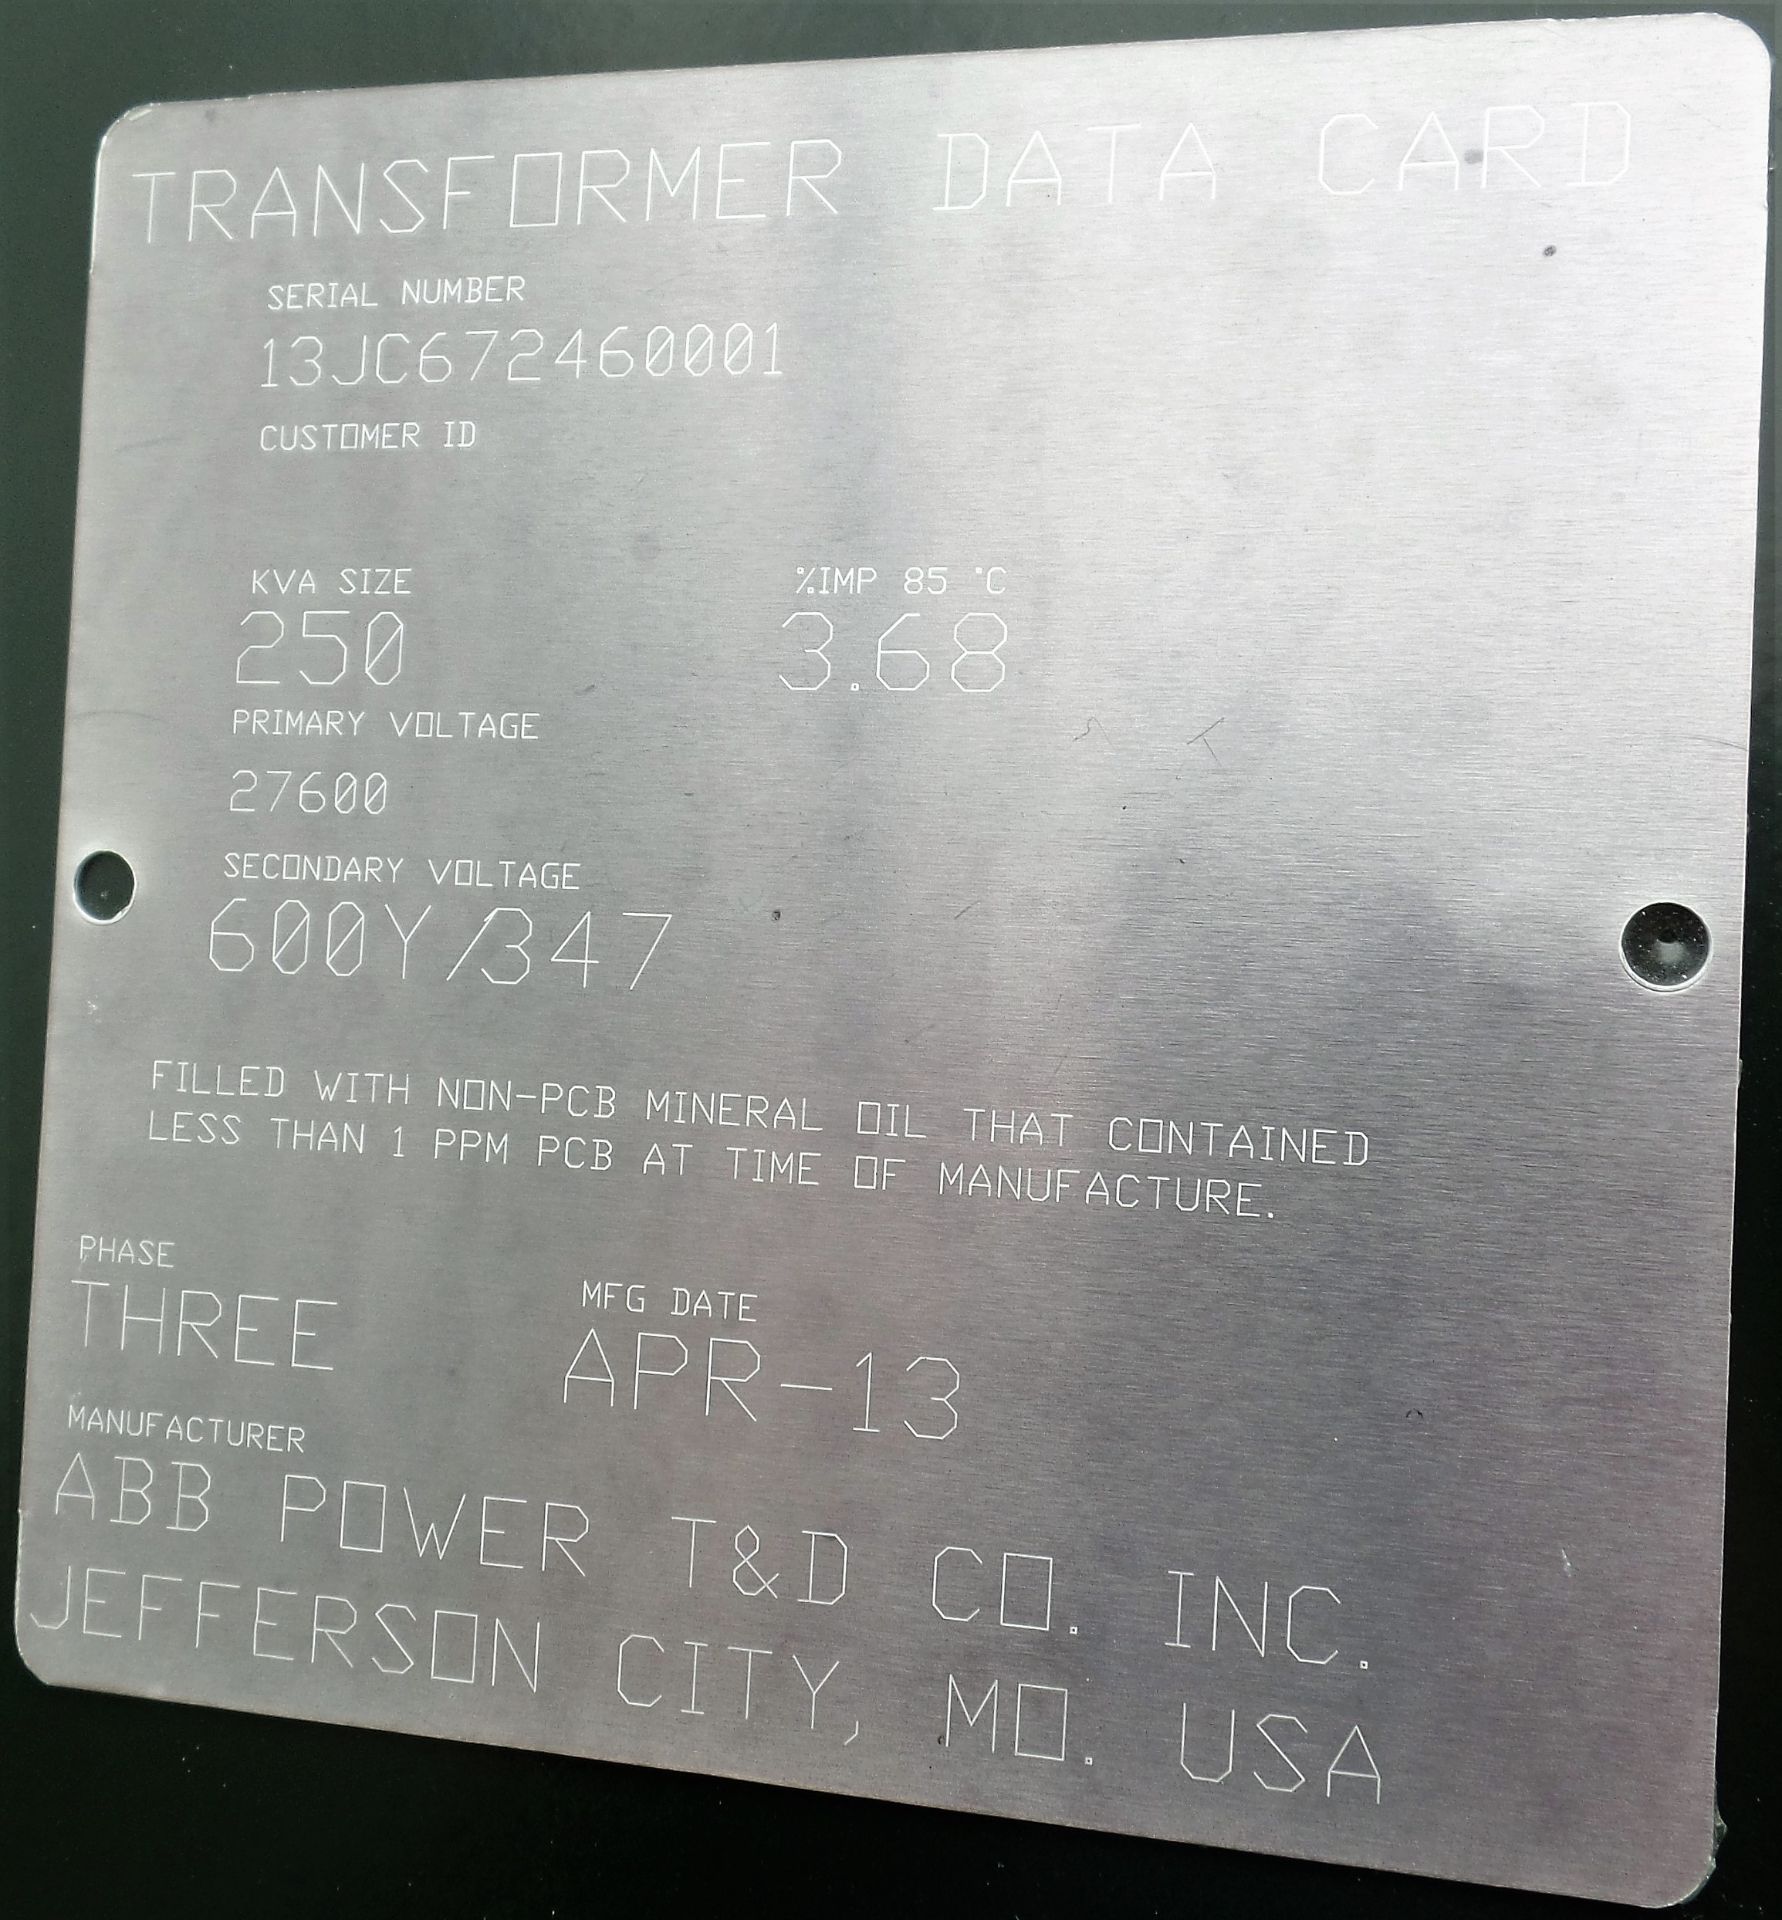 2013 ABB POWER 250KVA OUTDOOR TRANSFORMER, 27,600 PRIMARY, 600Y/347 SECONDARY, S/N 13JC672460001 ( - Image 2 of 2